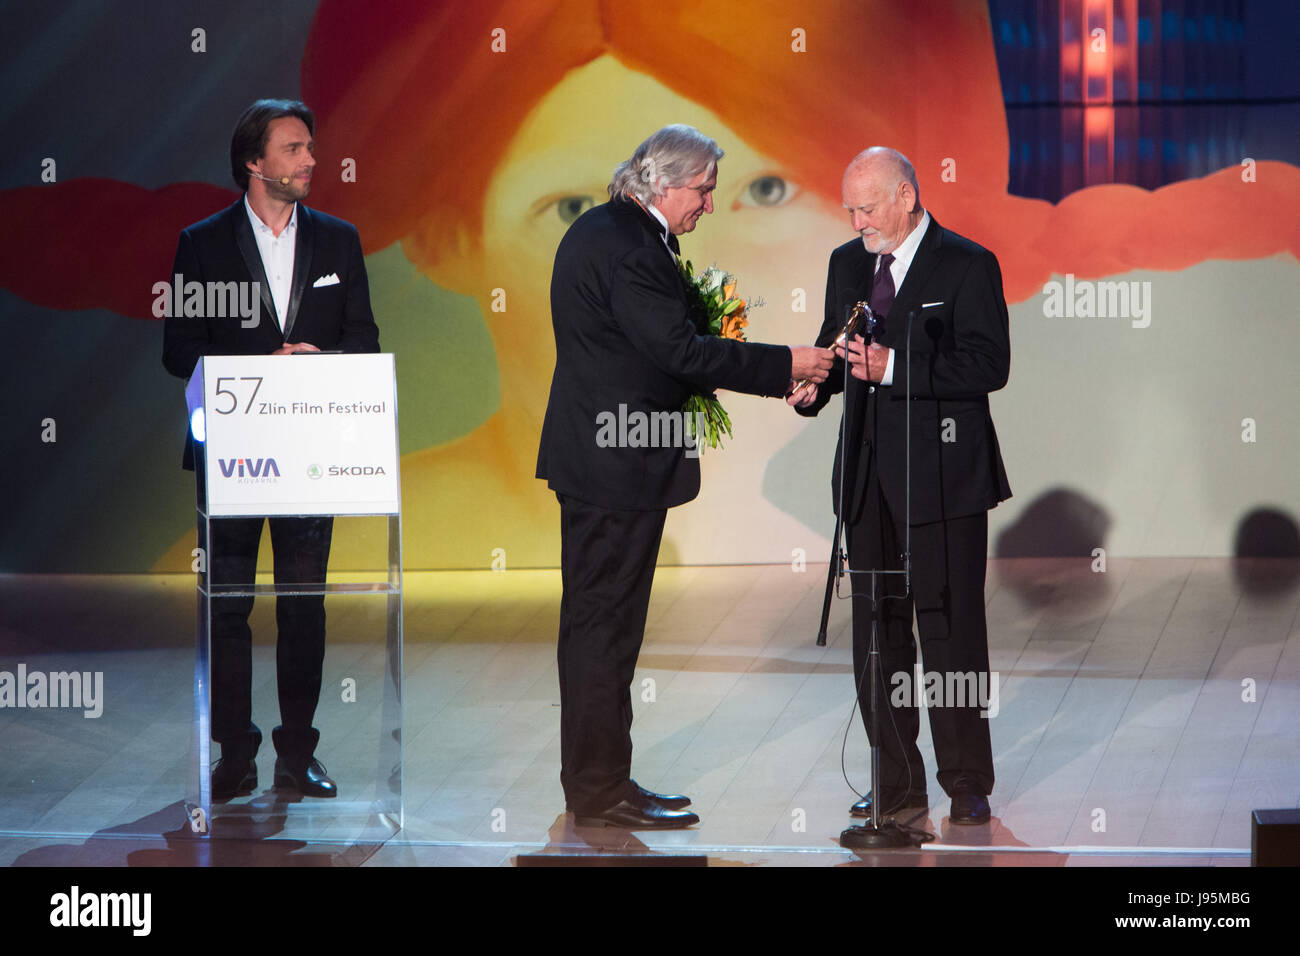 Zlin, Czech Republic. 02nd June, 2017. Czech artist and costume designer Theodor Pistek, 84, right, Oscar winner for his costumes in Milos Forman's film Amadeus (1984), received the Golden Slipper for outstanding contribution to cinematography for children and youth at the 57th International Film Festival for Children and Youth in Zlin, Czech Republic, June 2, 2017. From left: Czech moderator Roman Vojtek and Festival's President Cestmir Vancura. Credit: Josef Omelka/CTK Photo/Alamy Live News Stock Photo